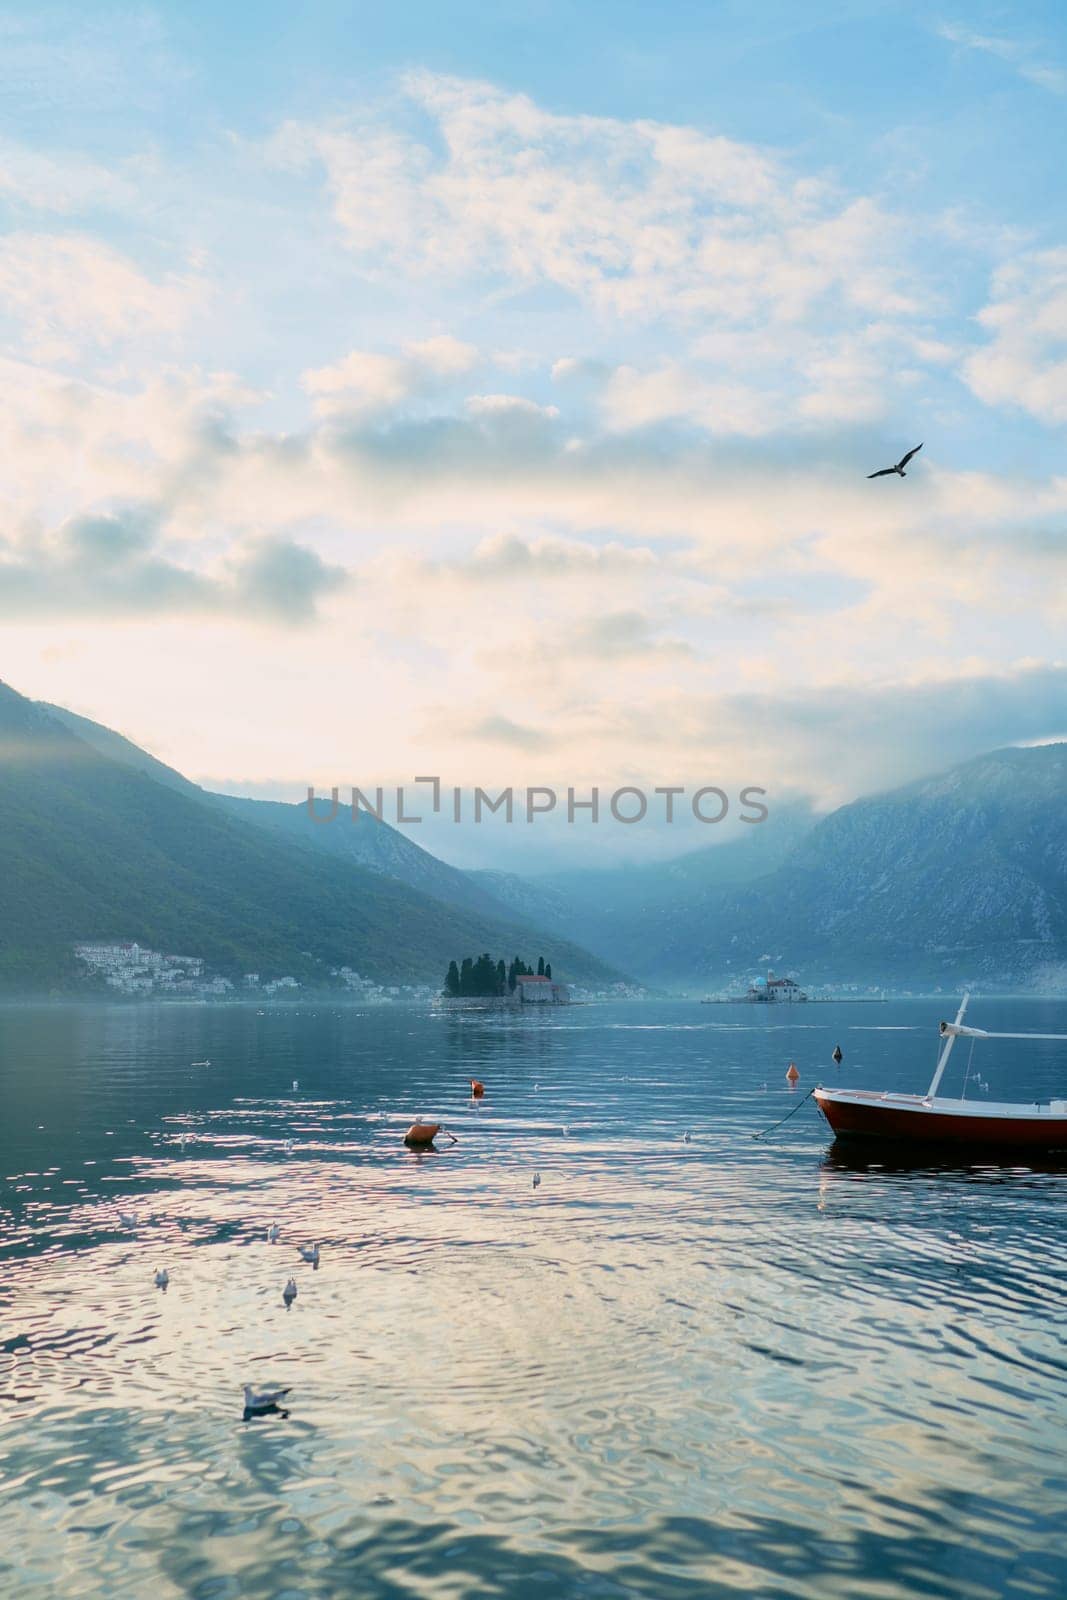 Seagulls sway on the waves near a moored boat. High quality photo